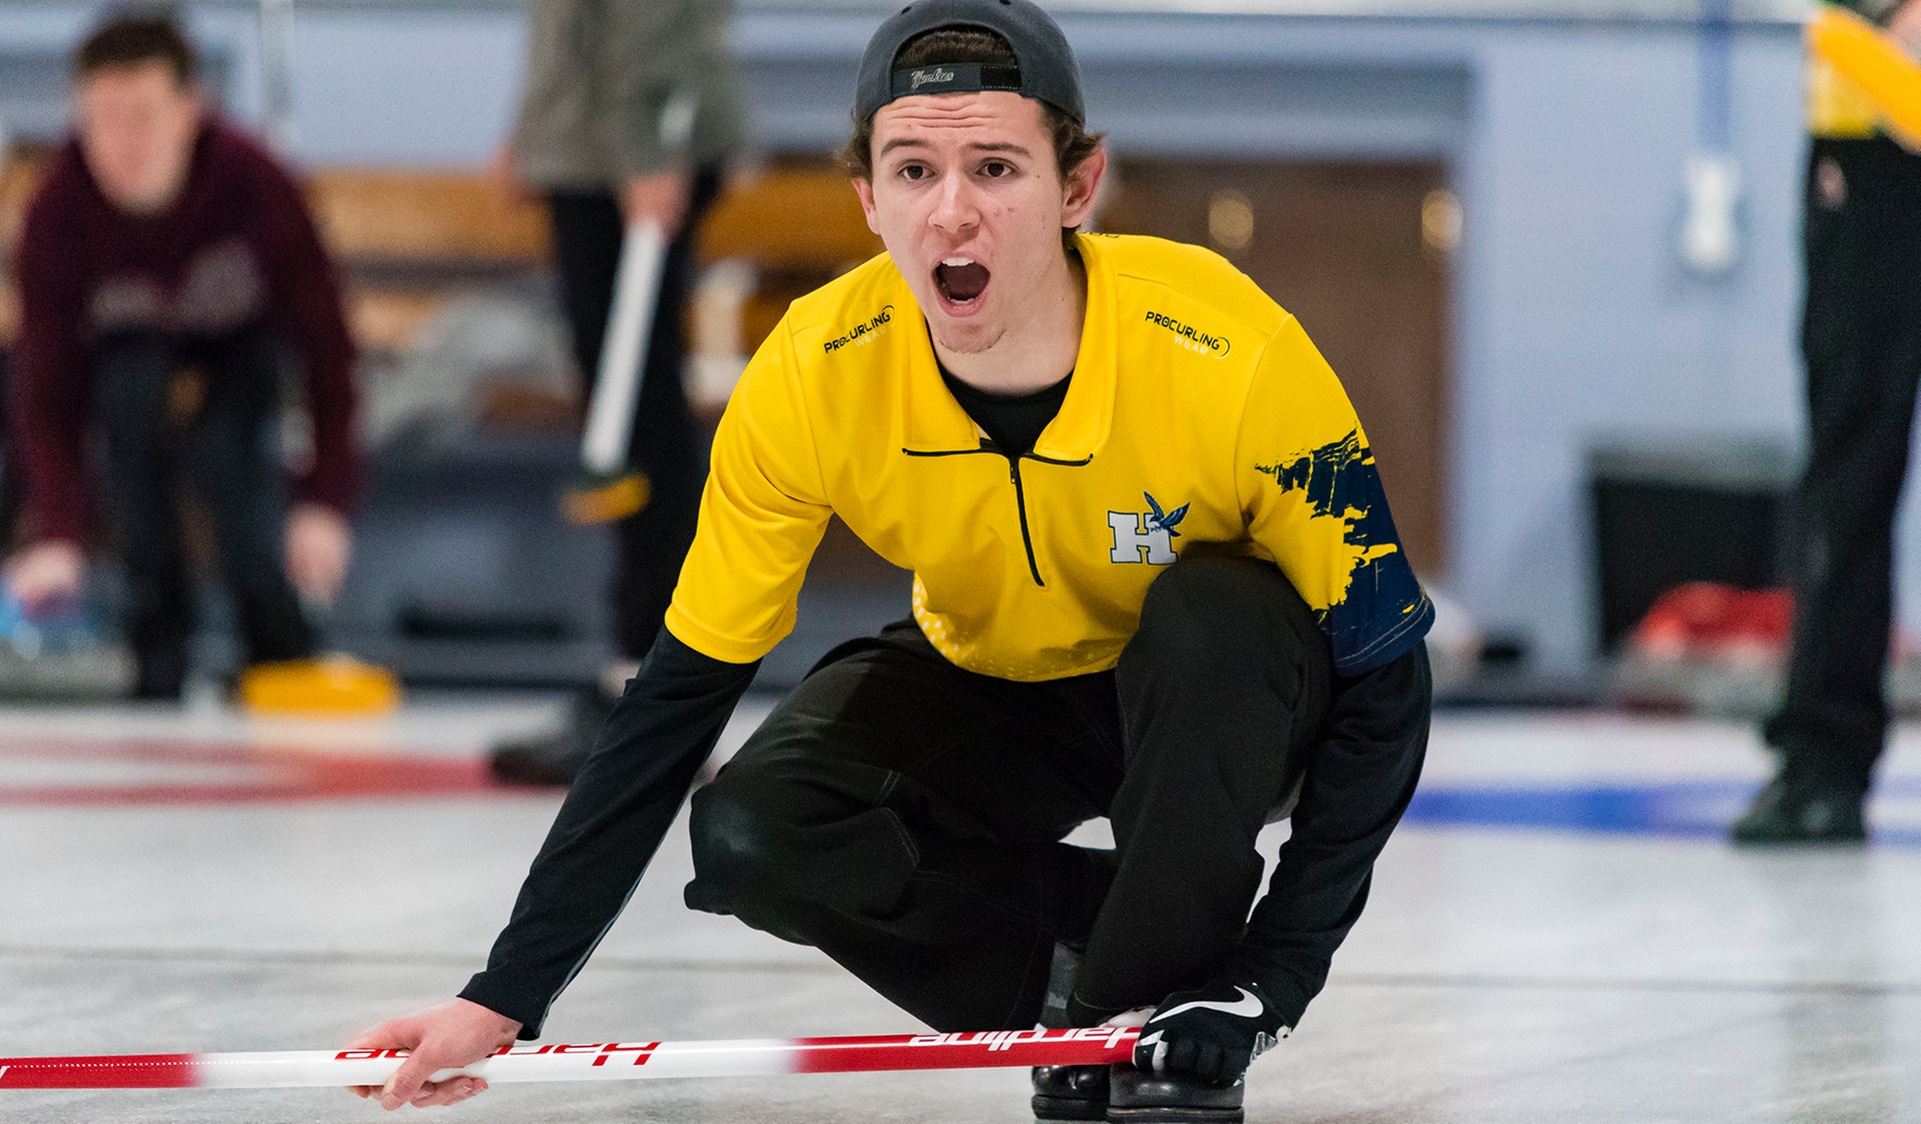 HAWKS PUT IN SOLID PERFORMANCE AT 2019 HUMBER BONSPIEL